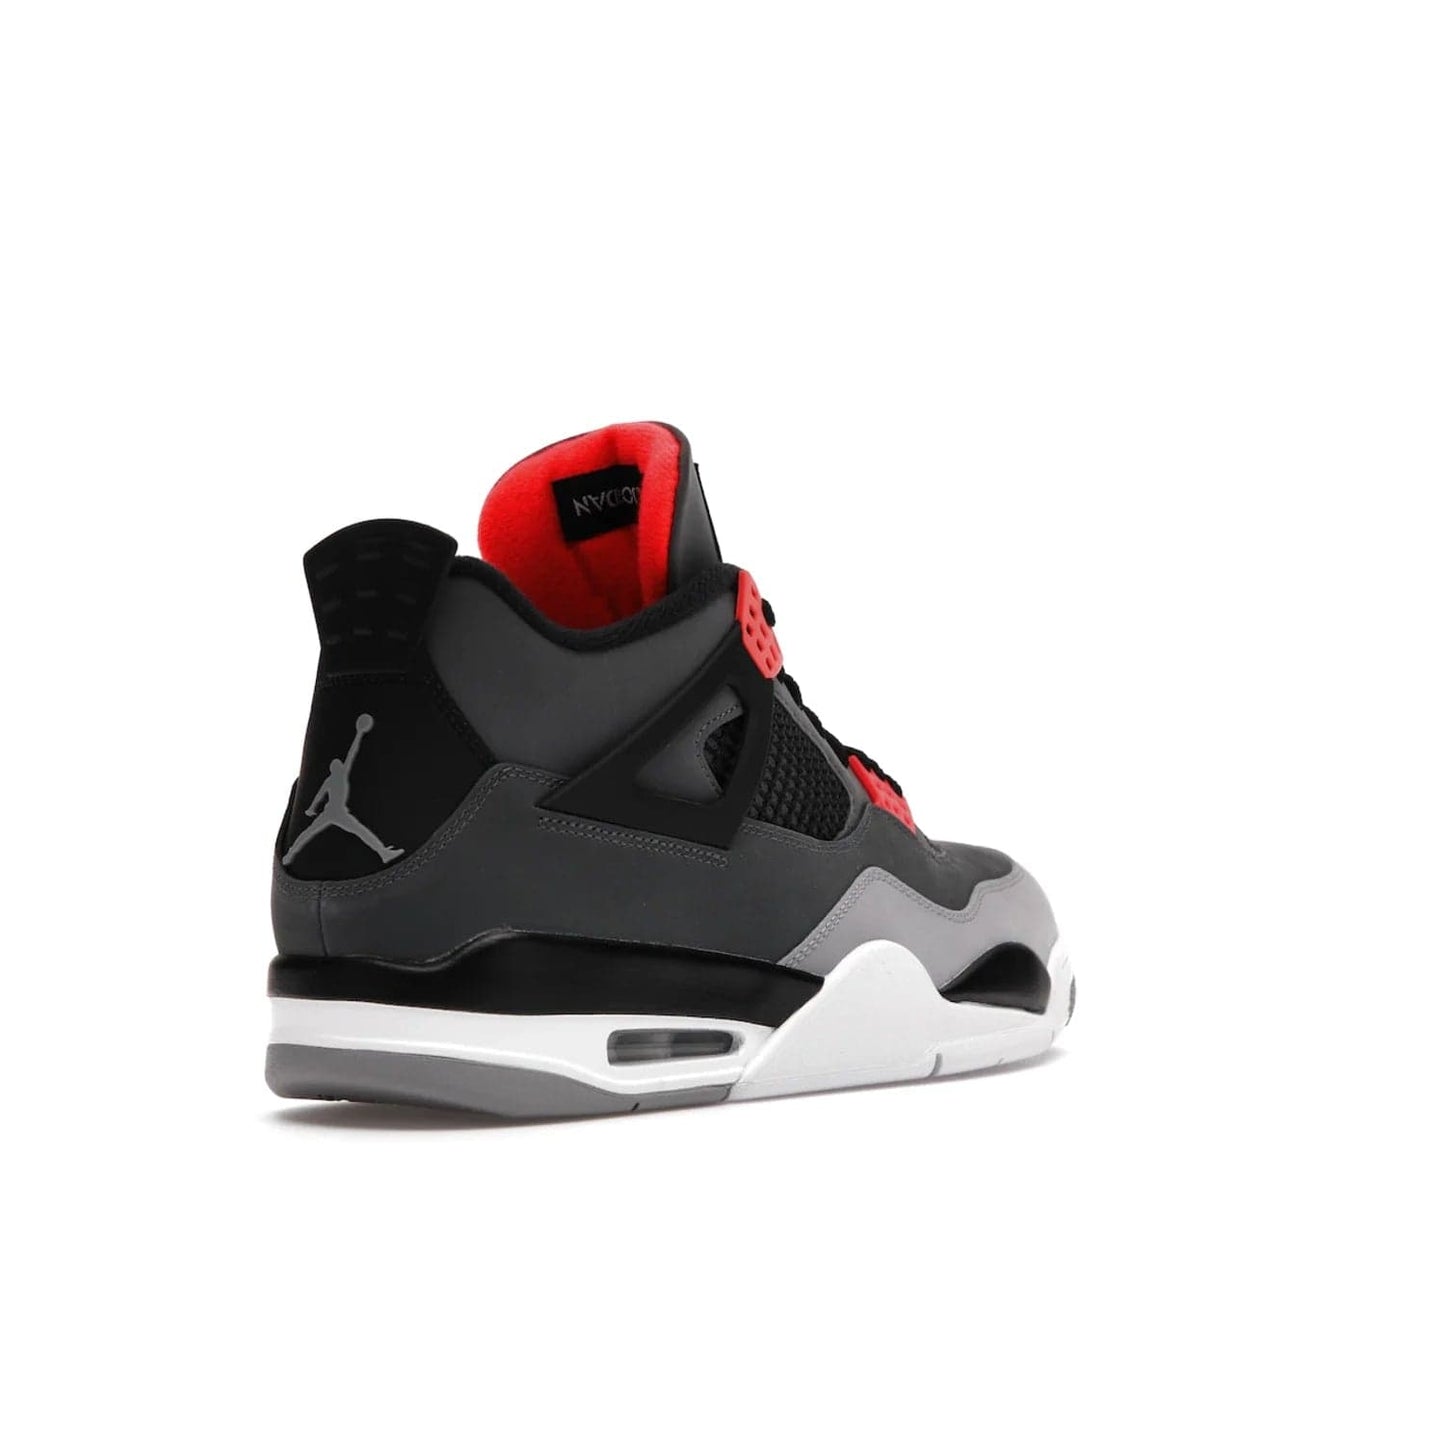 Jordan 4 Retro Infrared - Image 32 - Only at www.BallersClubKickz.com - Introducing the classic & timeless Air Jordan 4 Infrared. Durabuck upper, TPU mesh inserts, tech straps & heel tabs in dark grey and infrared accents. White sole with visible Air units. Out June 15, 2022. Get your pair now!